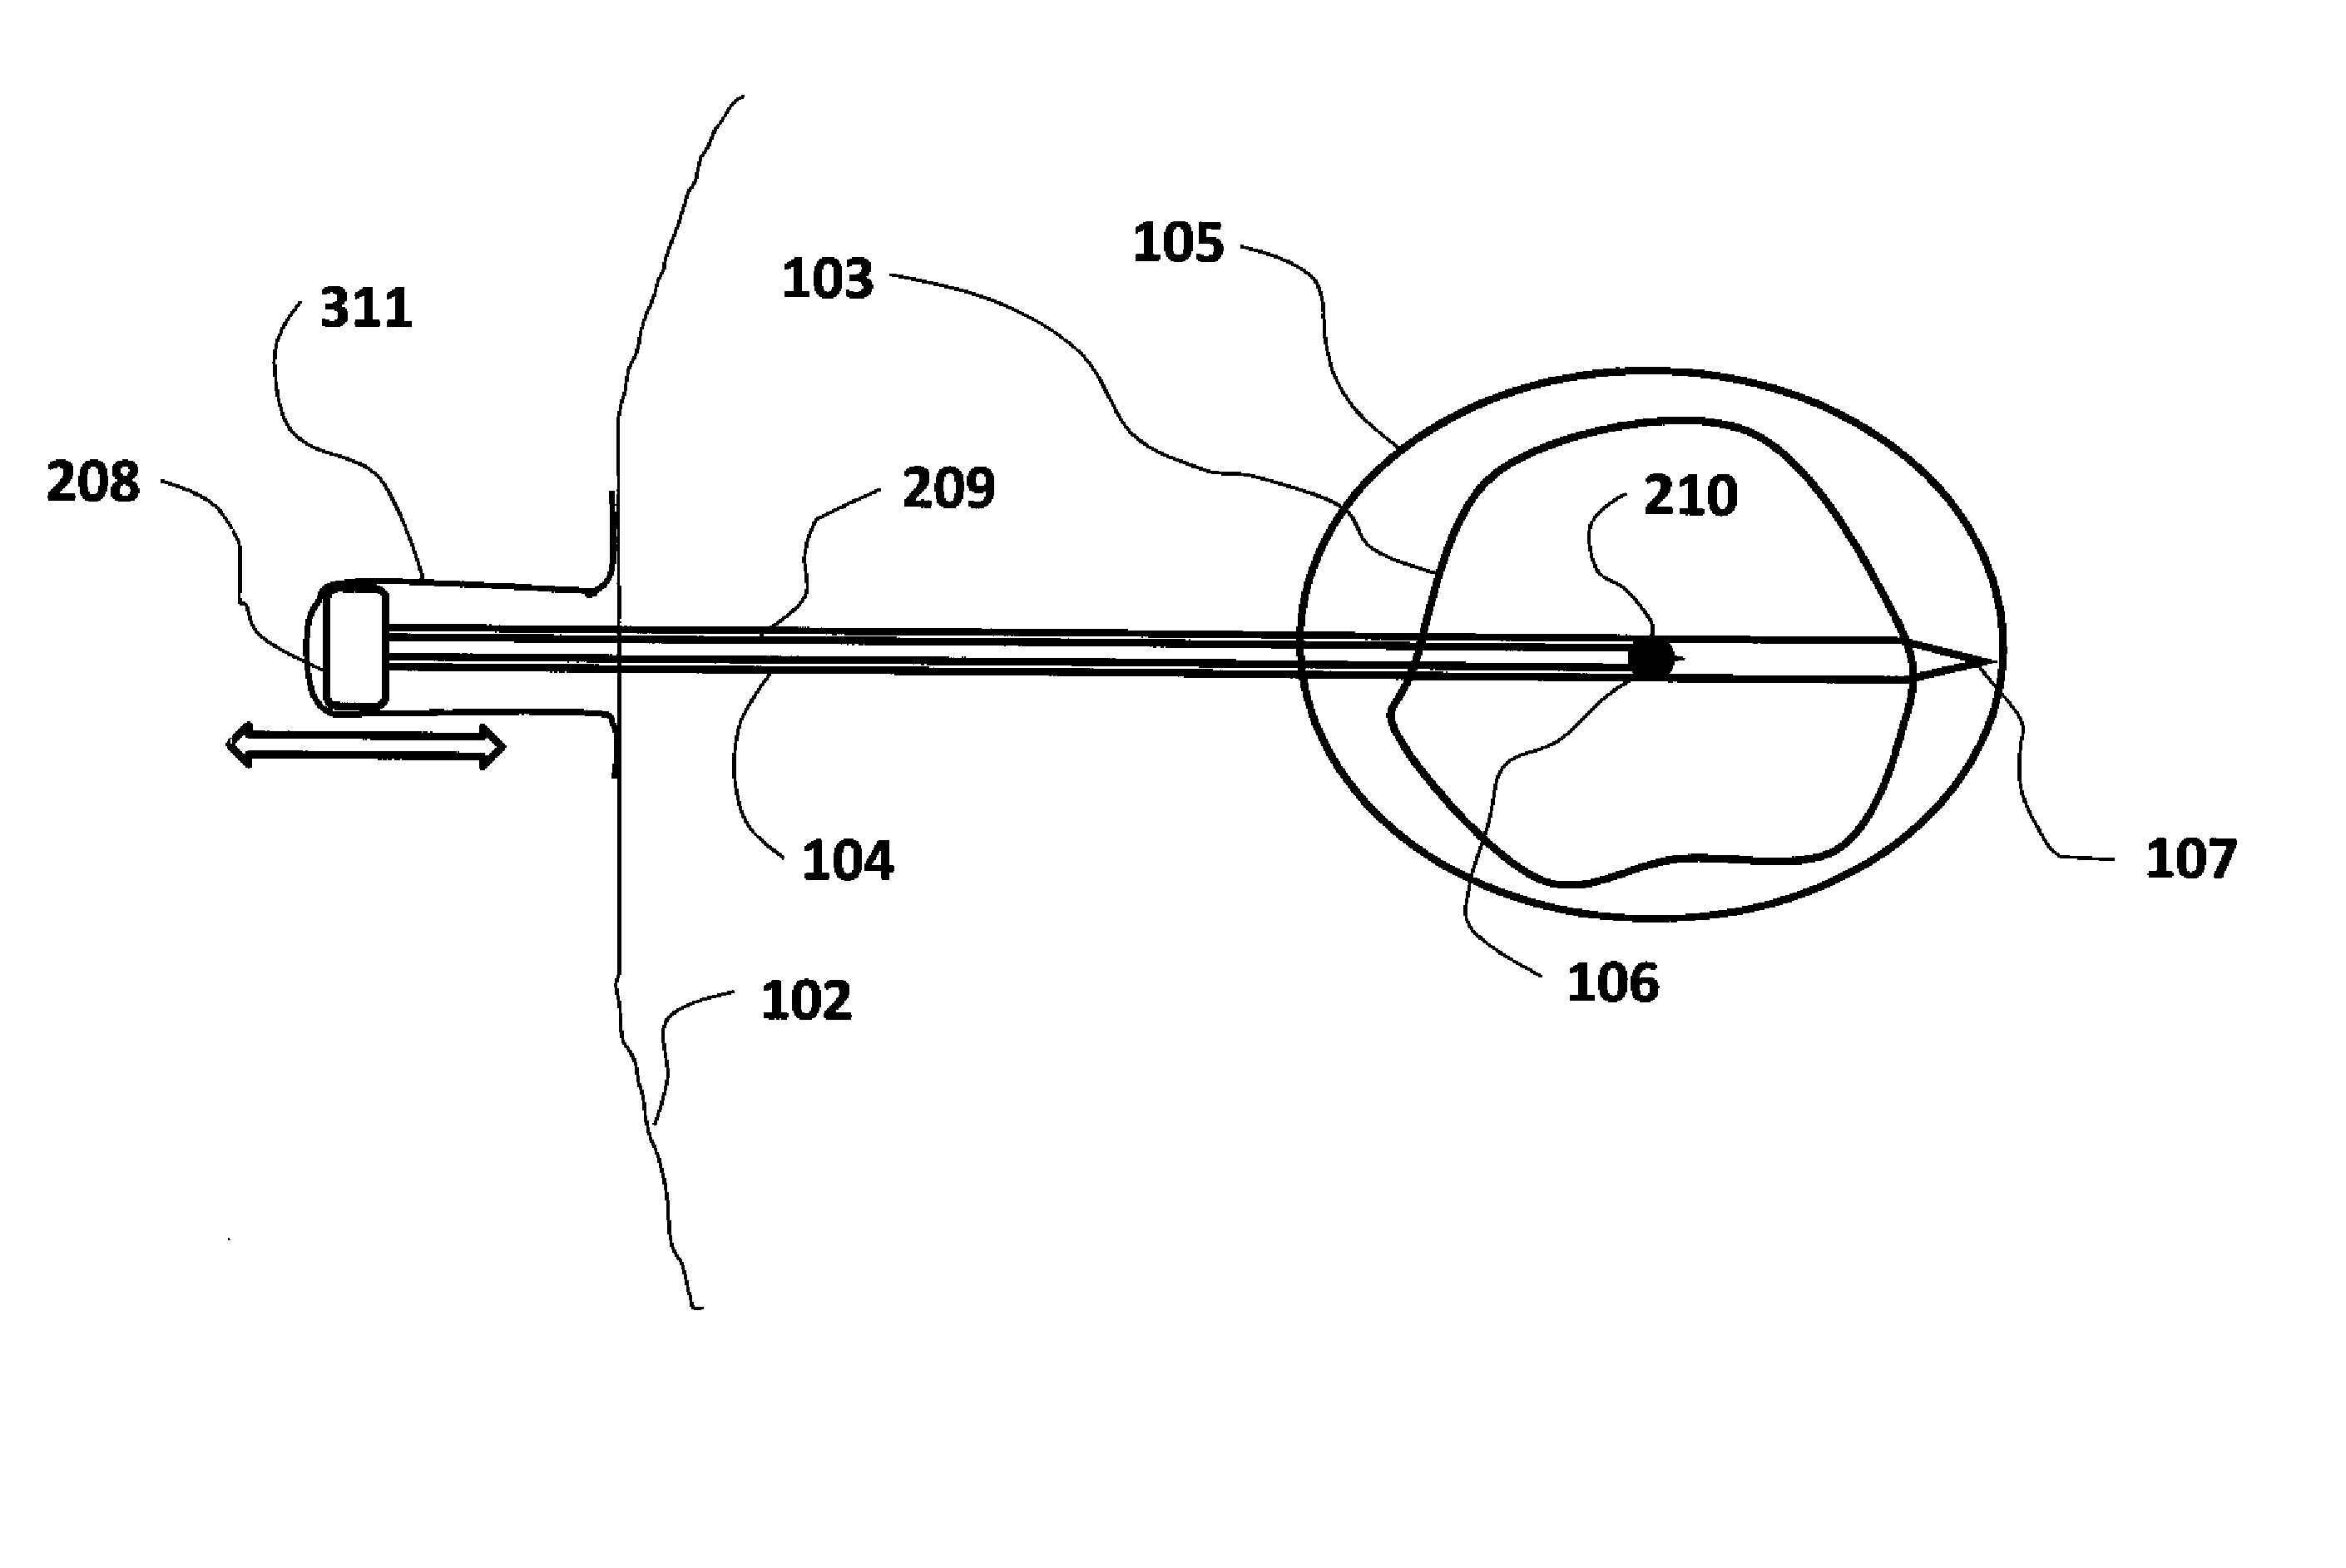 Combined cryotherapy and brachytherapy device and method